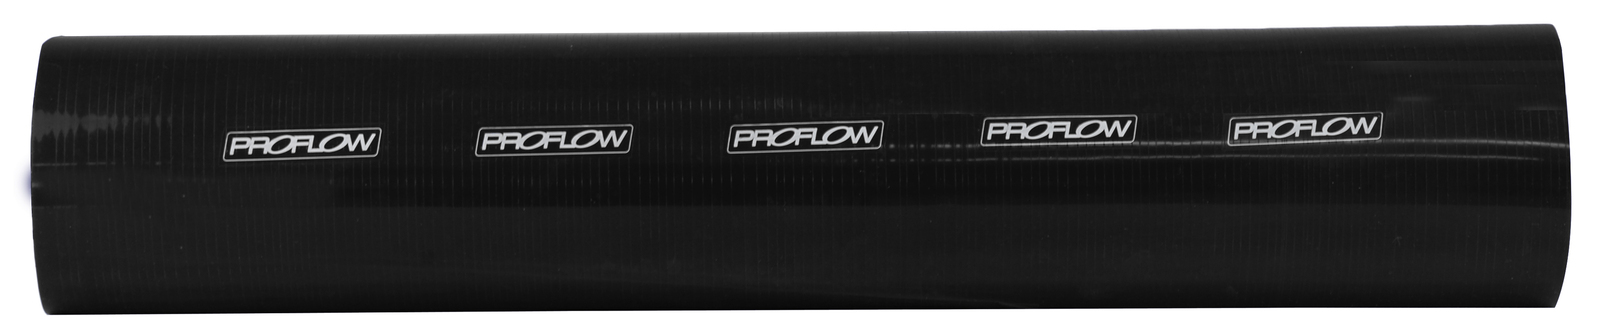 Proflow Hose Tubing Air intake, Silicone, Straight, 1.25in. Straight 2Ft Length, Black